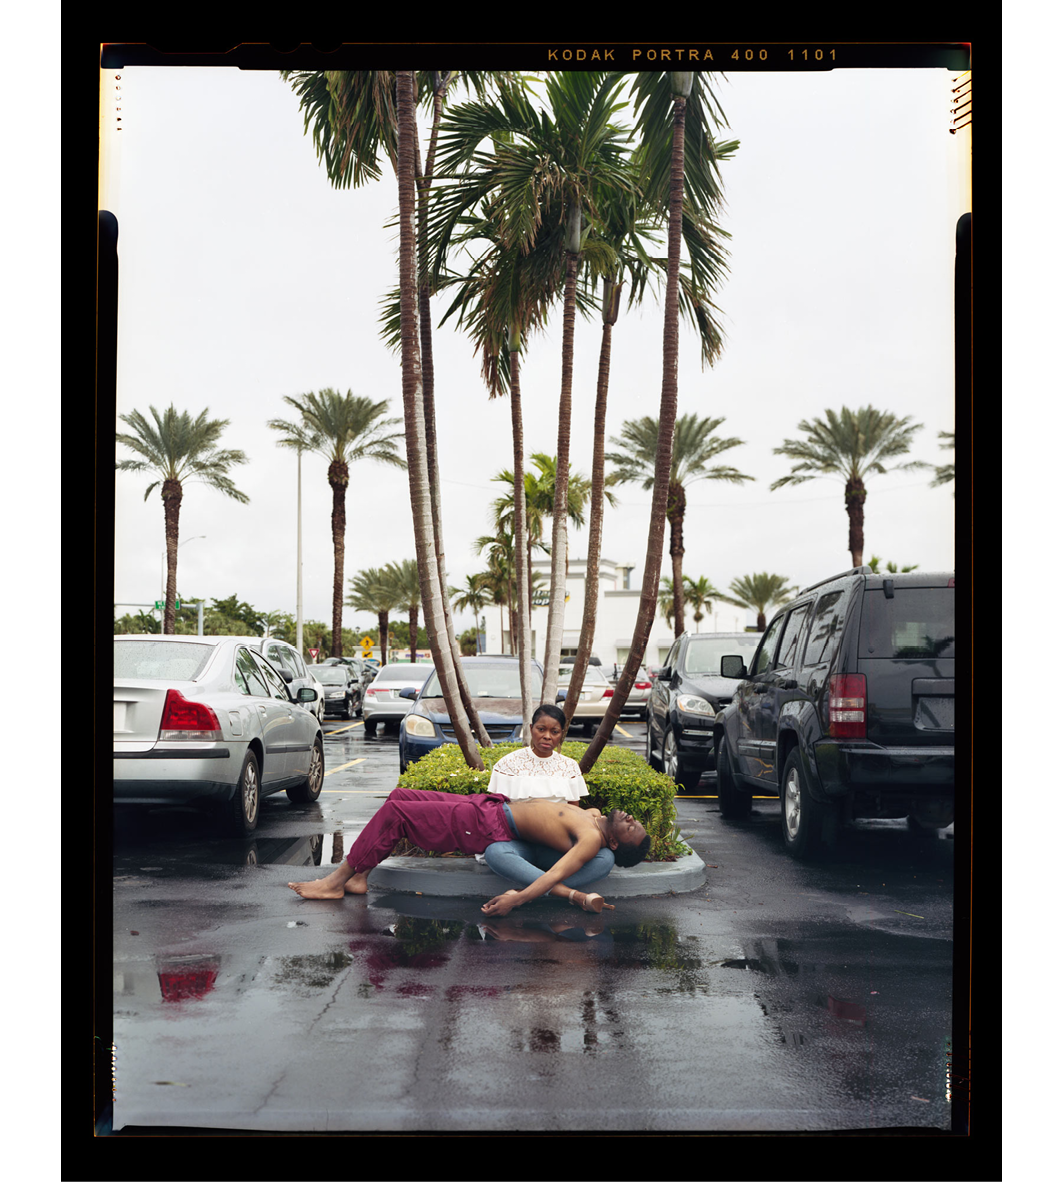 Images of a young boy who is sitting in the road, sounded by cars, and palm trees. There is a man laying across the boy's lap